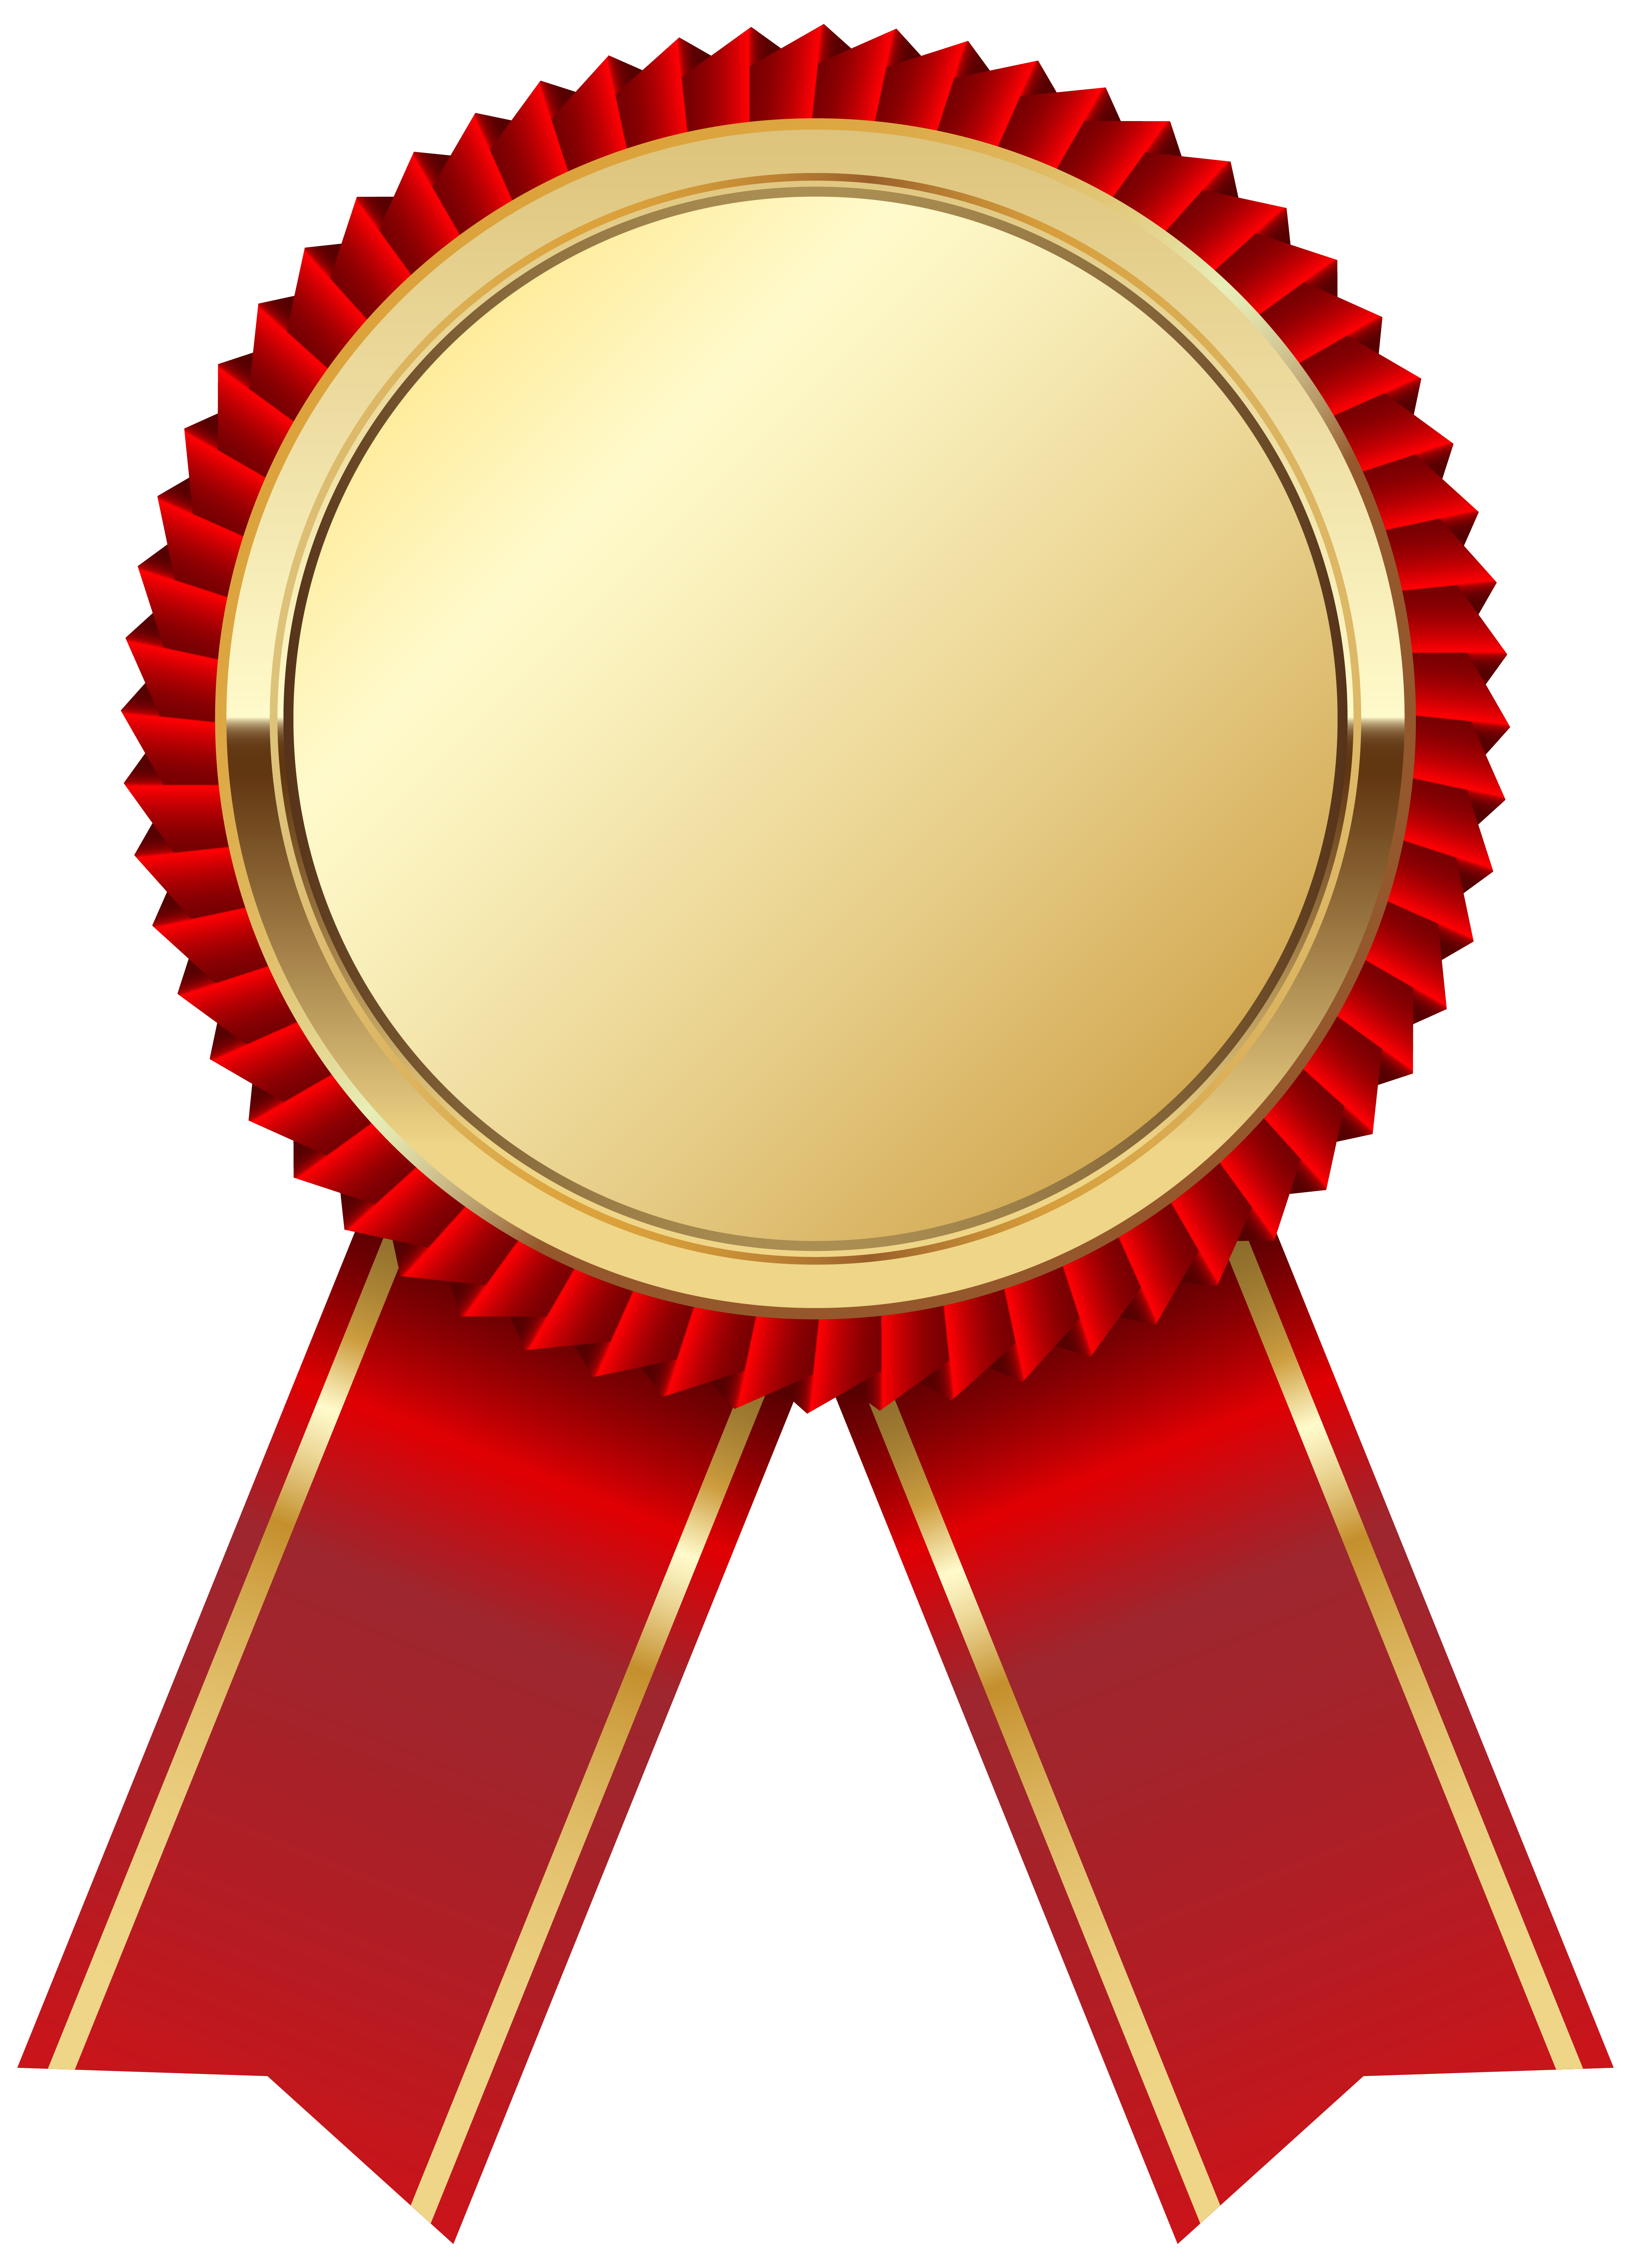 medals clipart - photo #22